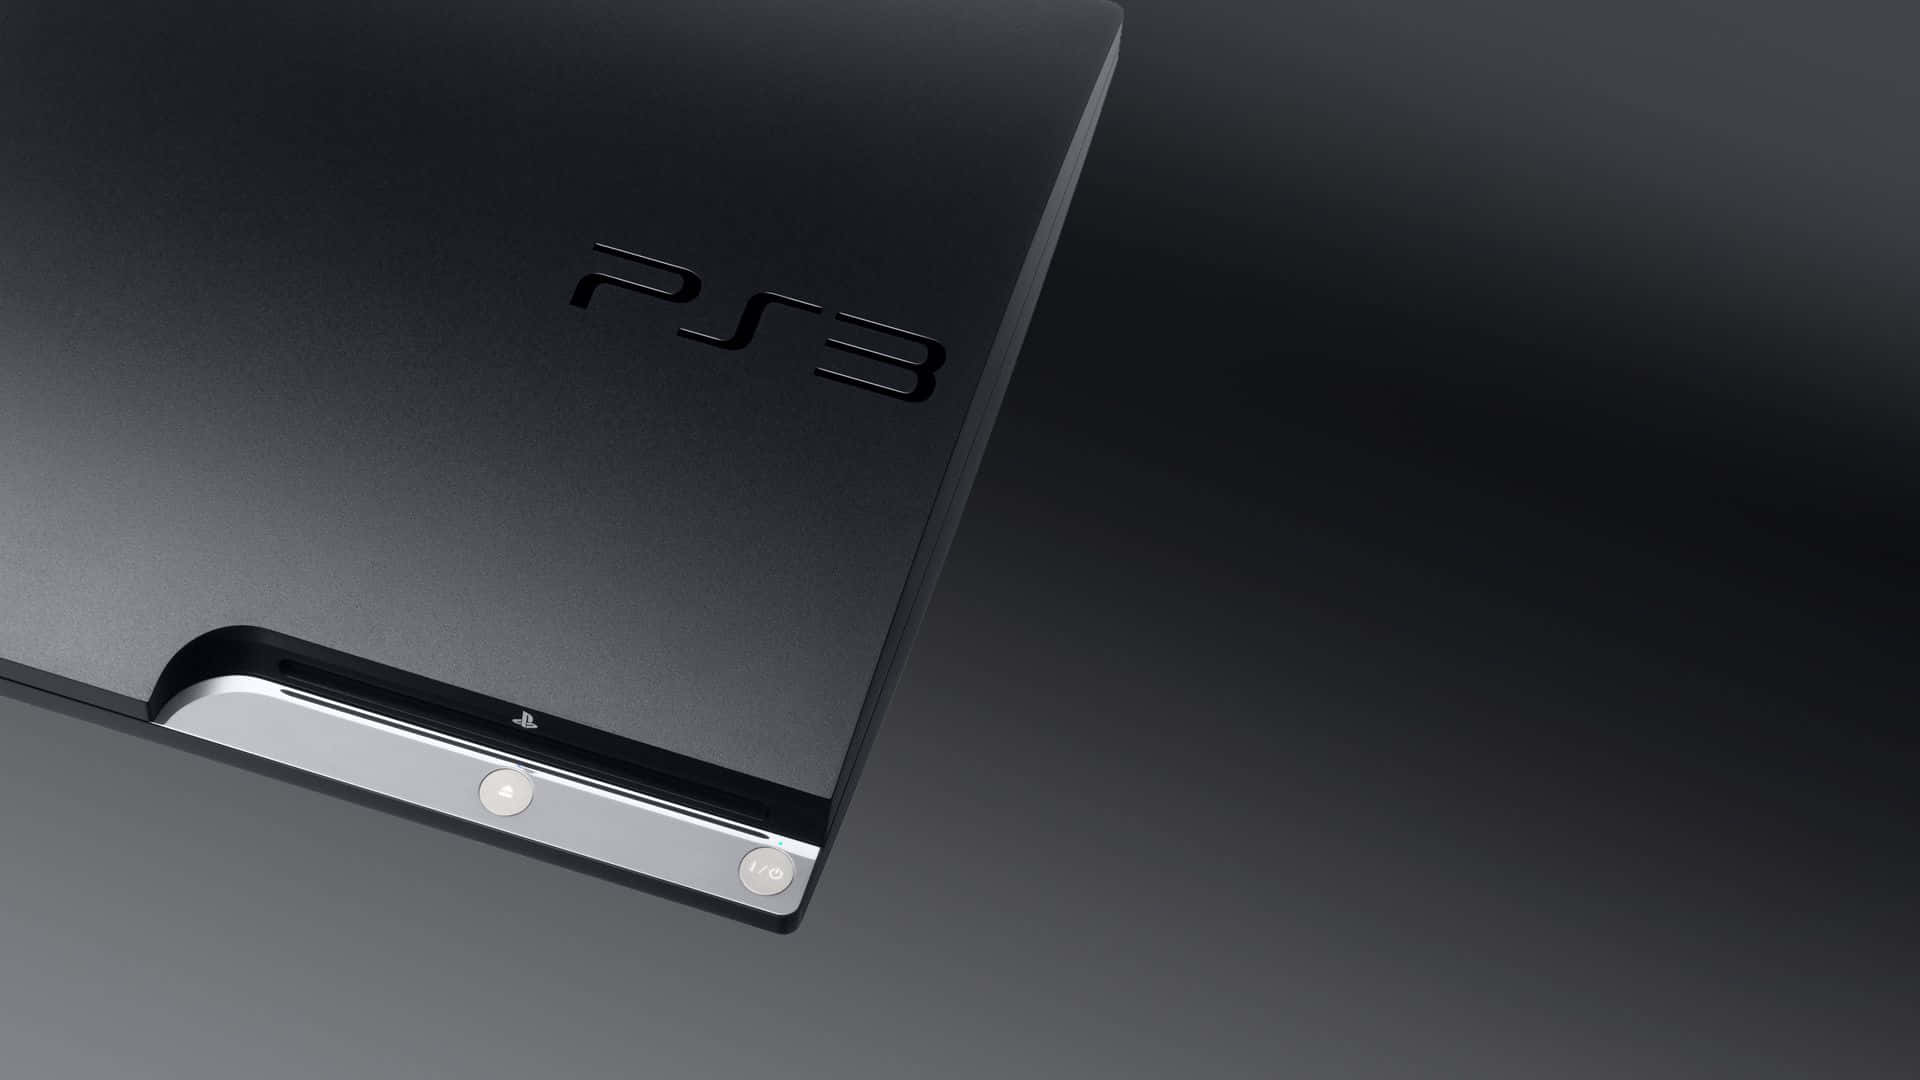 Slim Ps3 On Surface Wallpaper